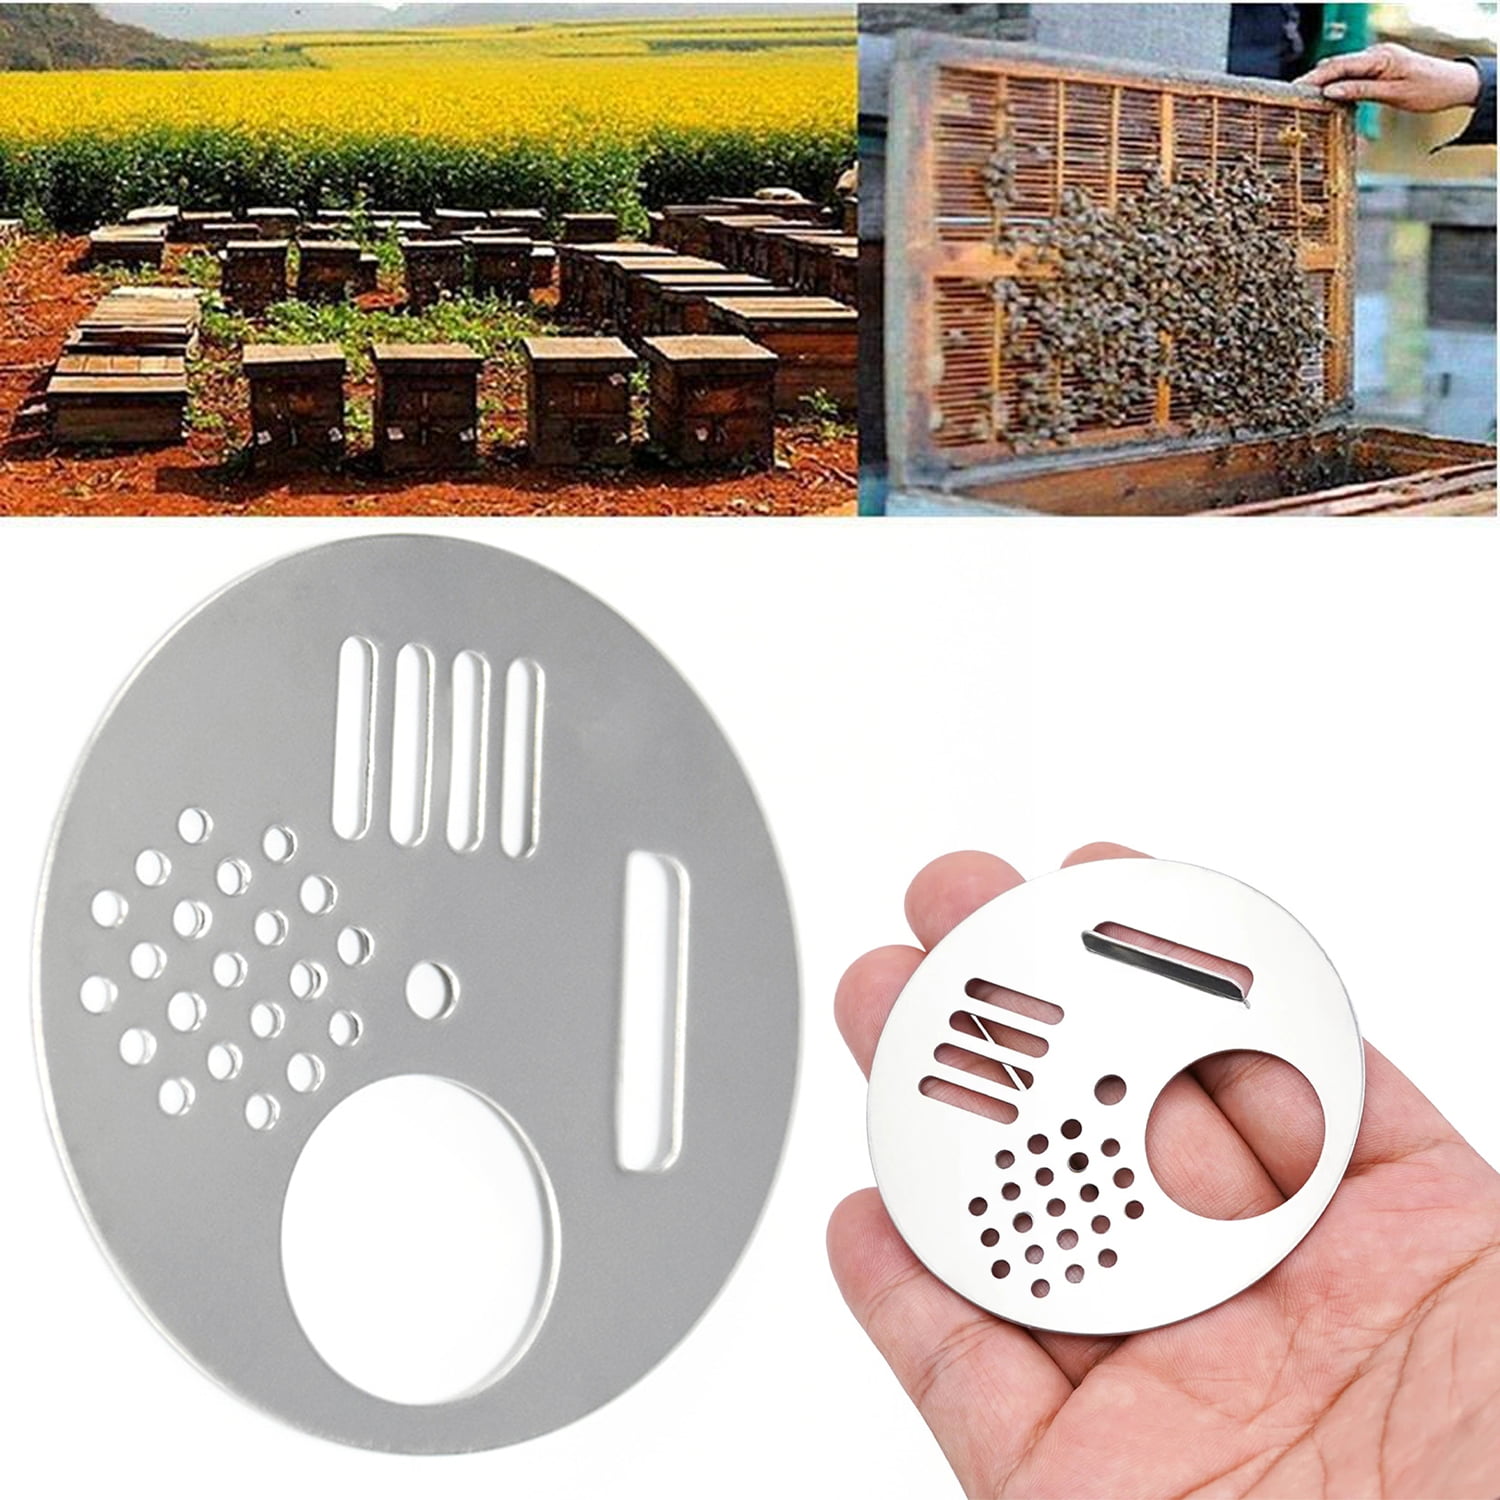 Details about   10pcs Stainless Steel Hive Entrance Nest Gate Door Beekeeping Equipment for Bee 